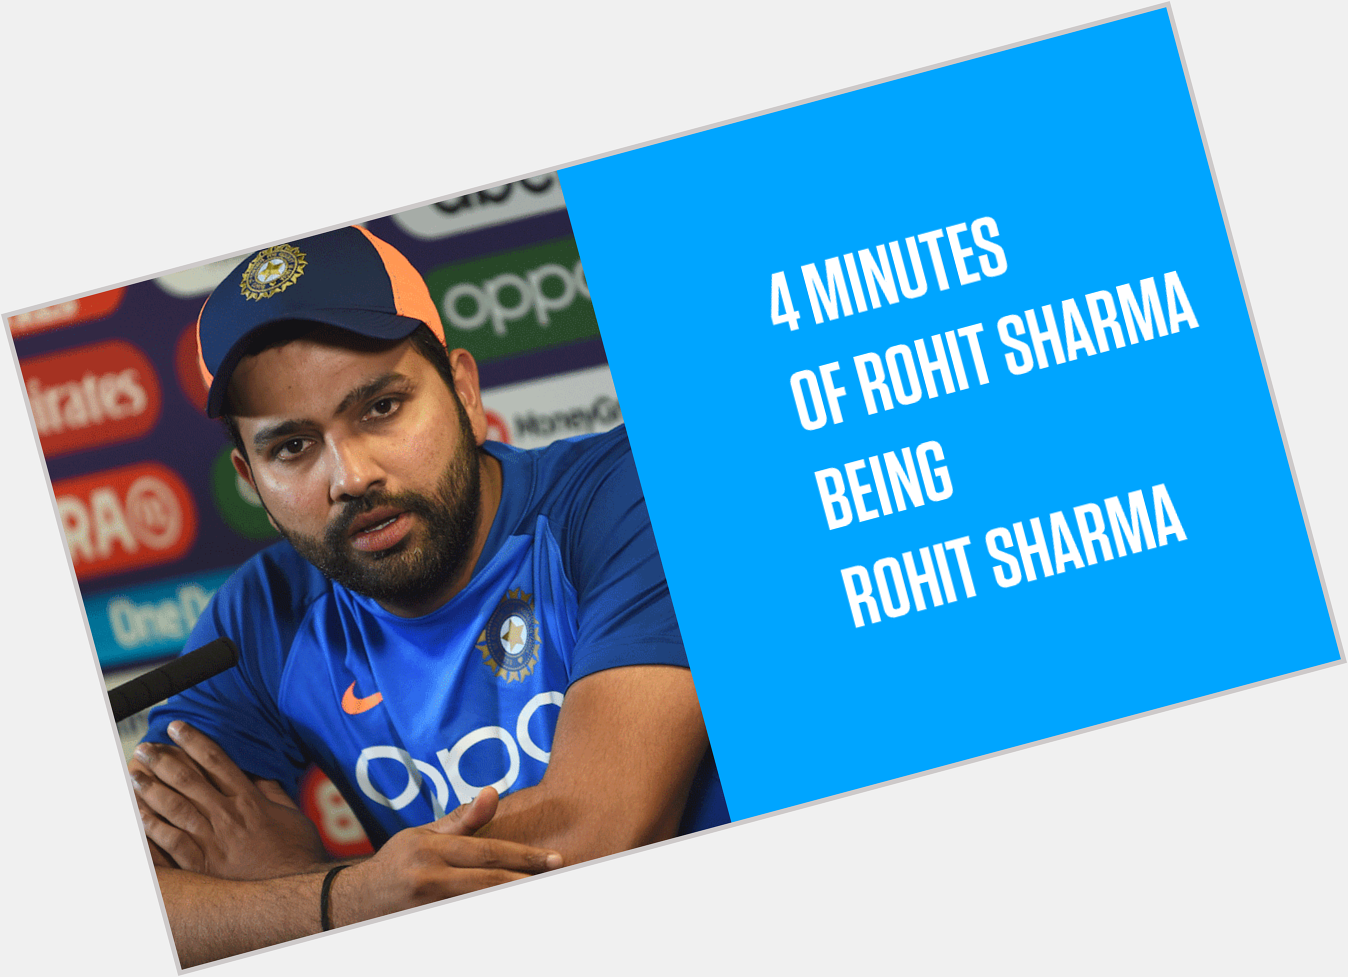 Happy birthday to the press conference legend, Rohit Sharma 